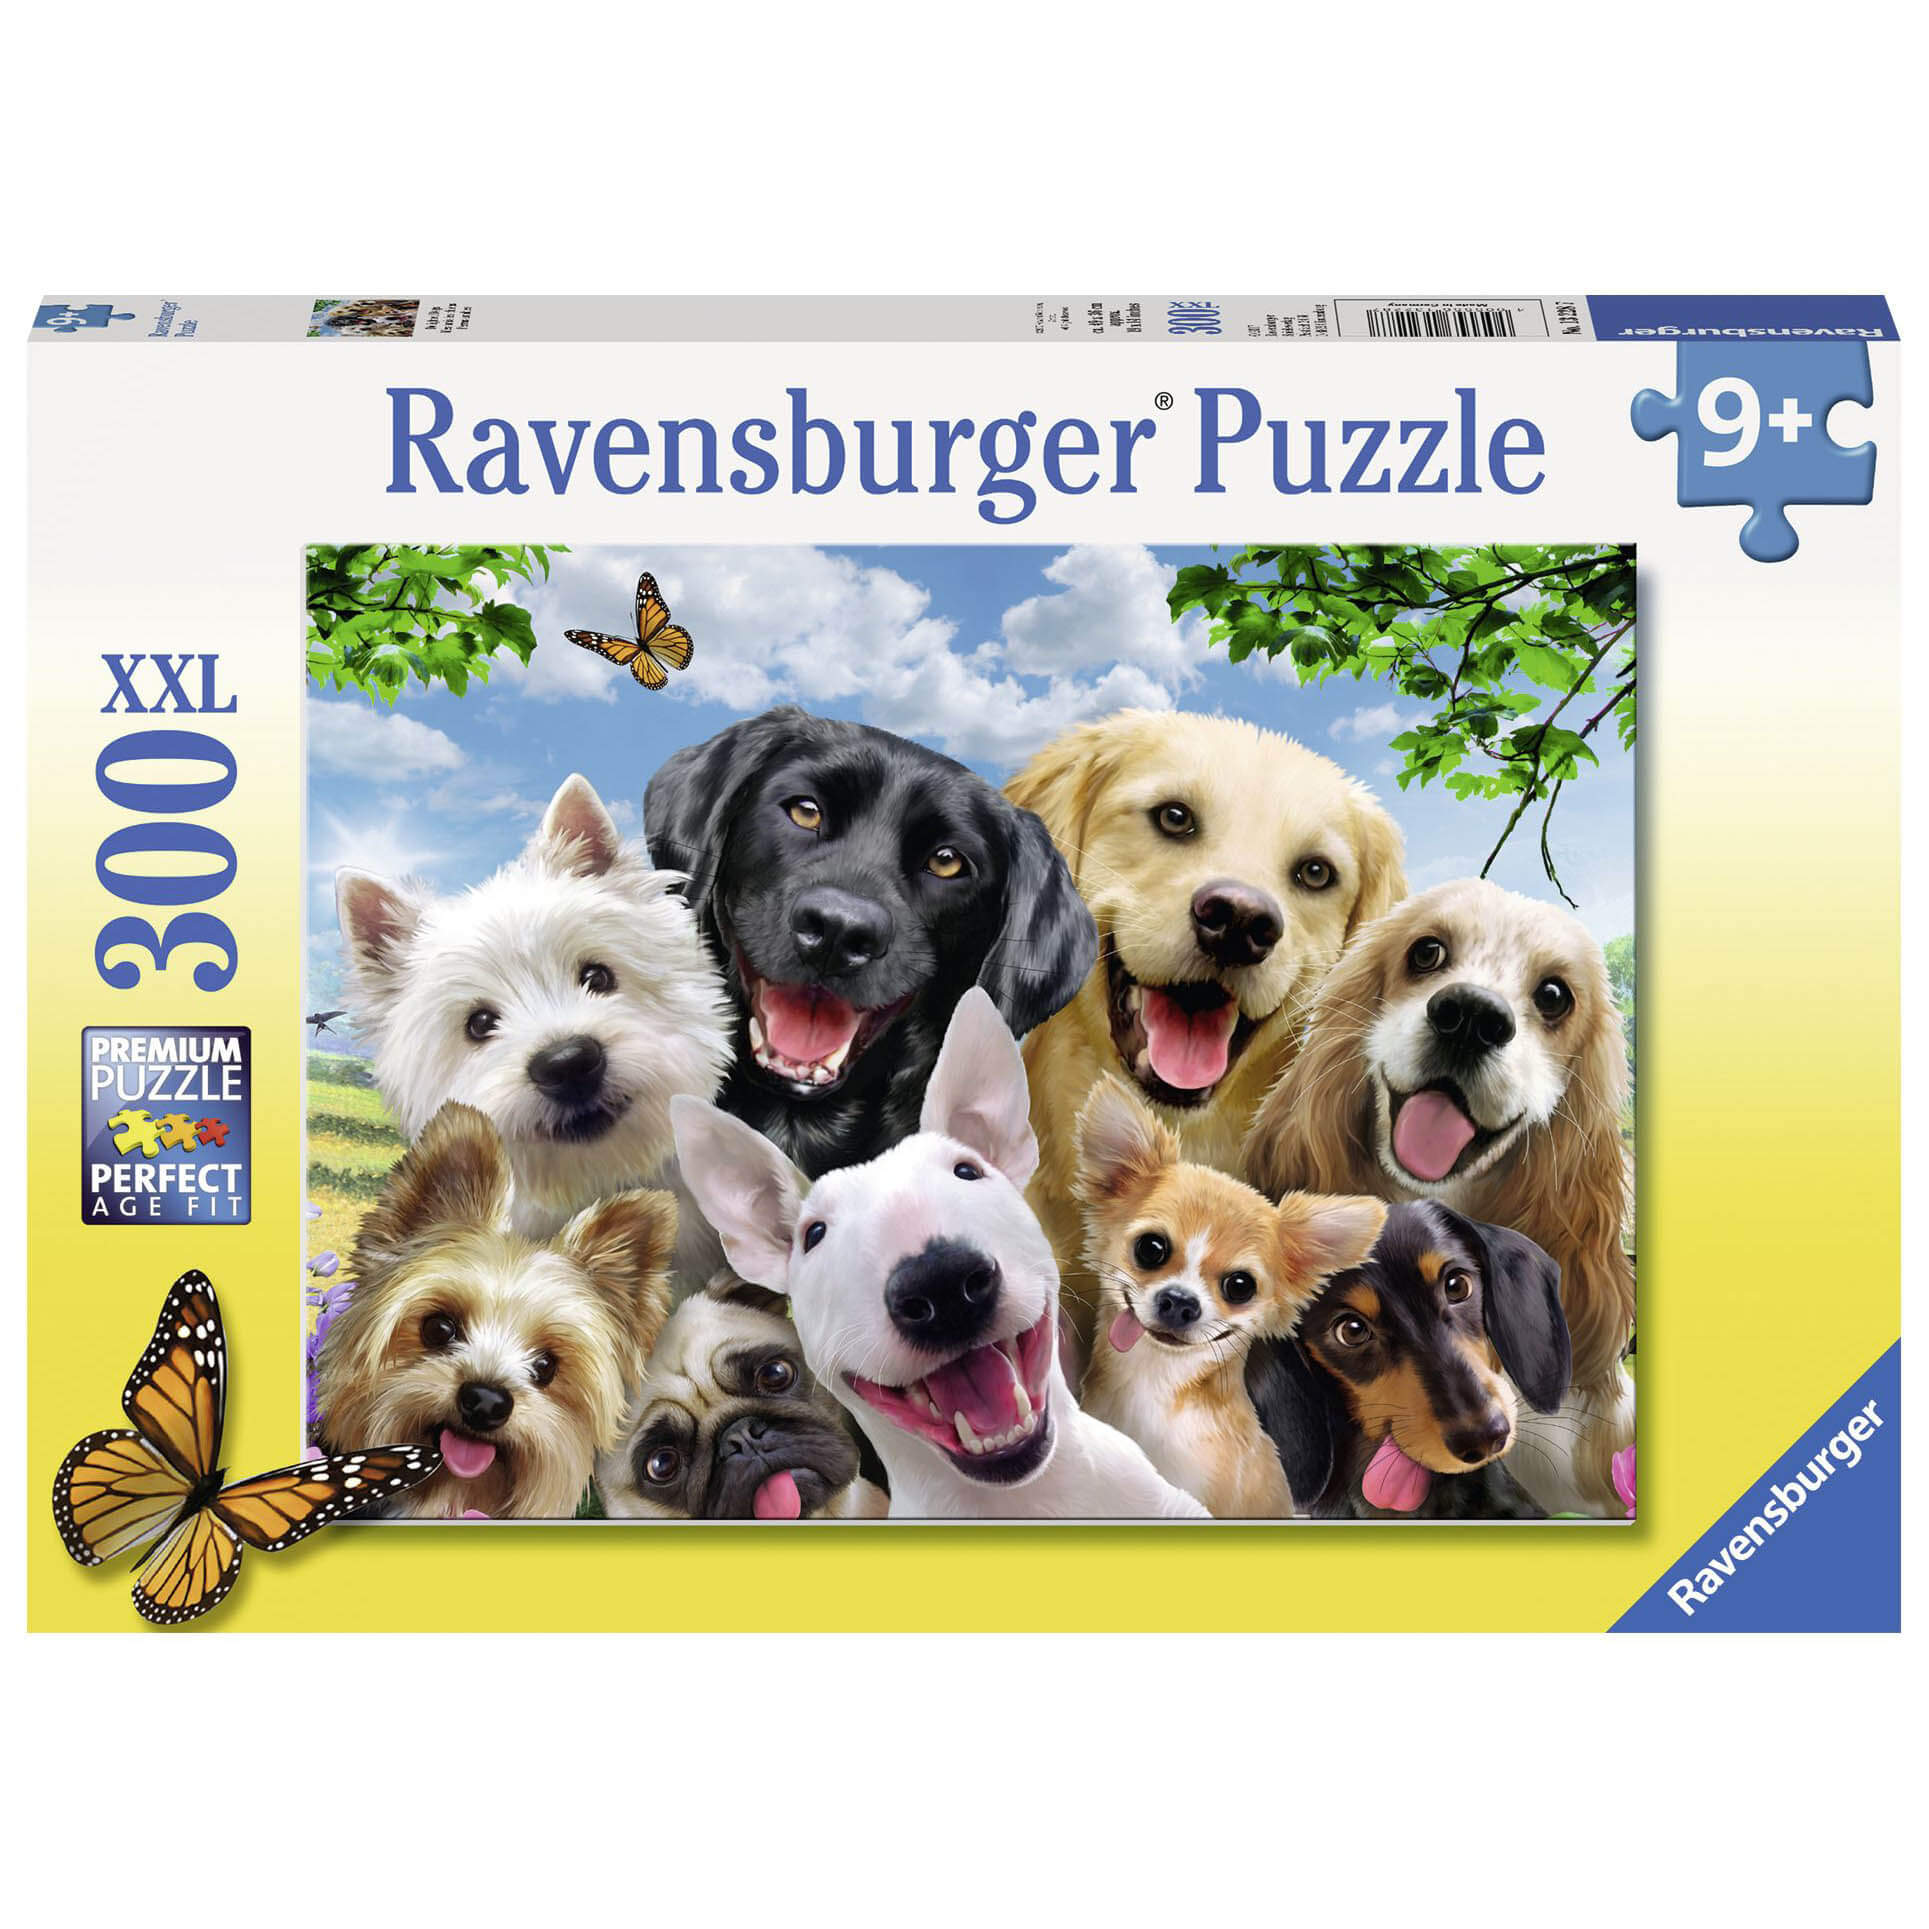 Ravensburger 300 pc Puzzles - Delighted Dogs